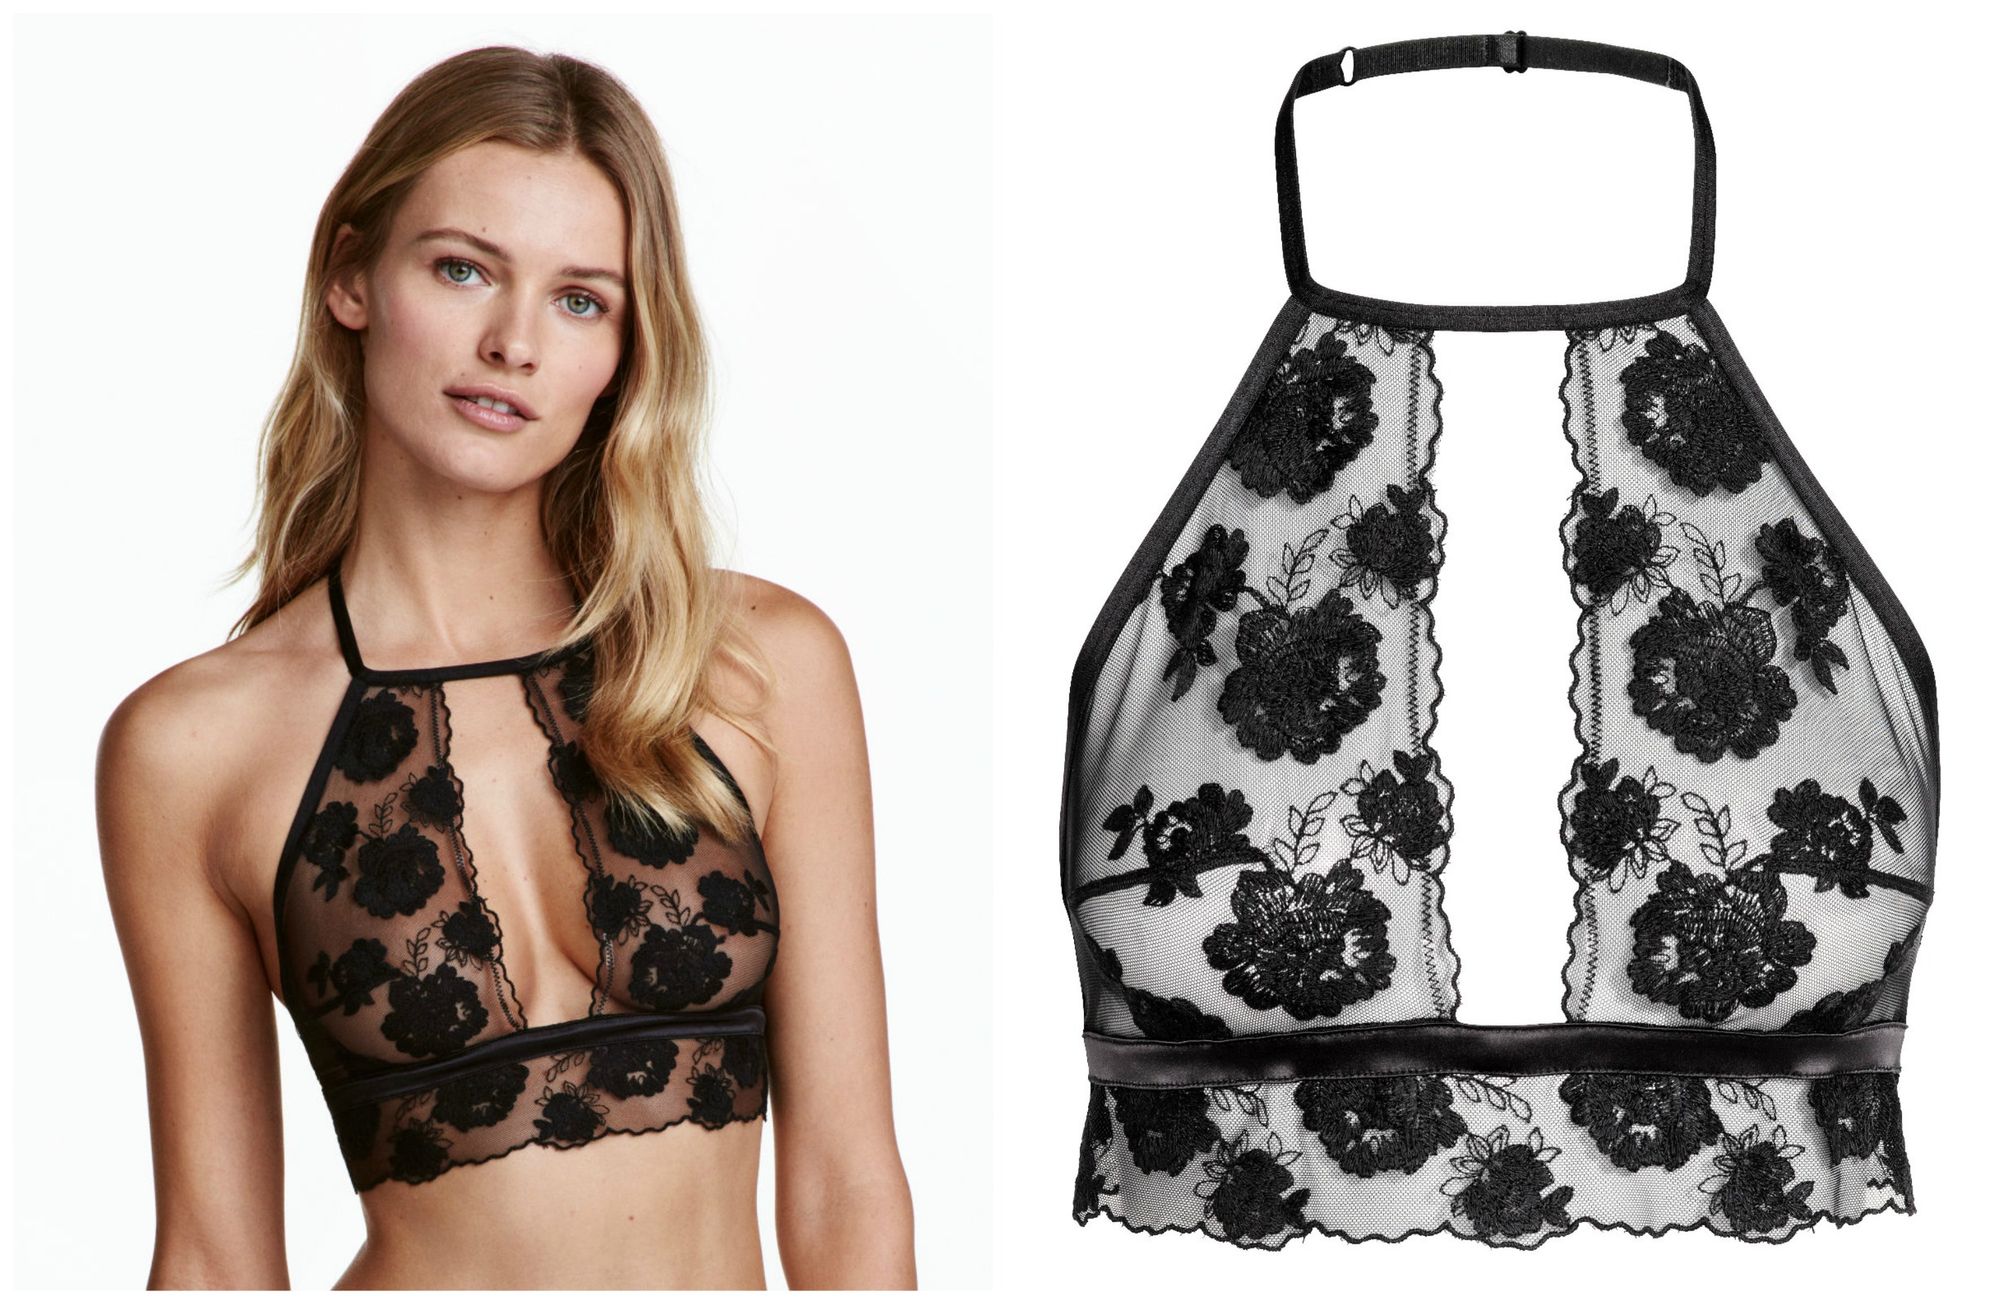 Fanciable Lingerie To Heat Things Up On V-Day